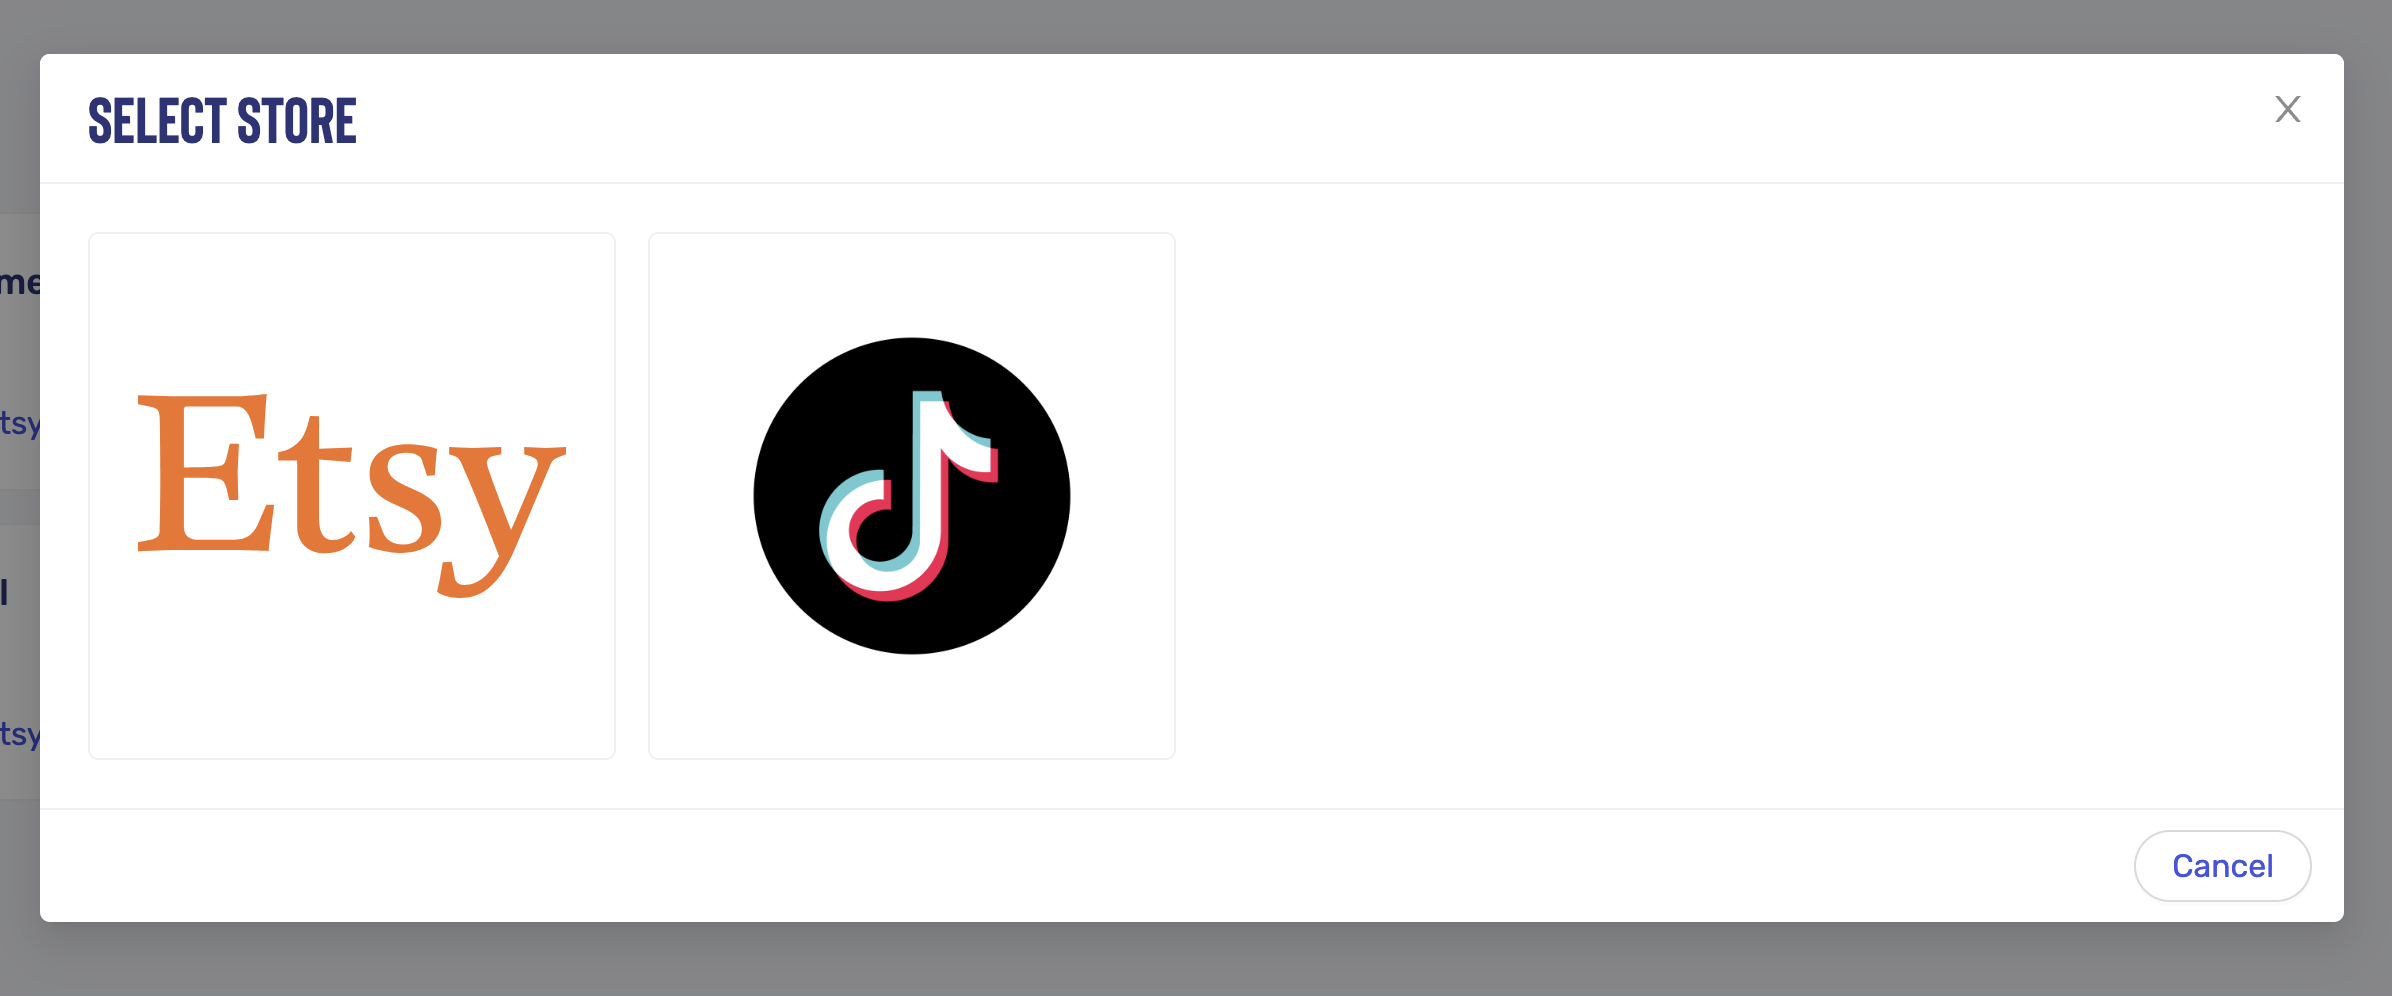 Make Your Move On Tiktok: Sell Effectively With Our Quick And Easy Integration